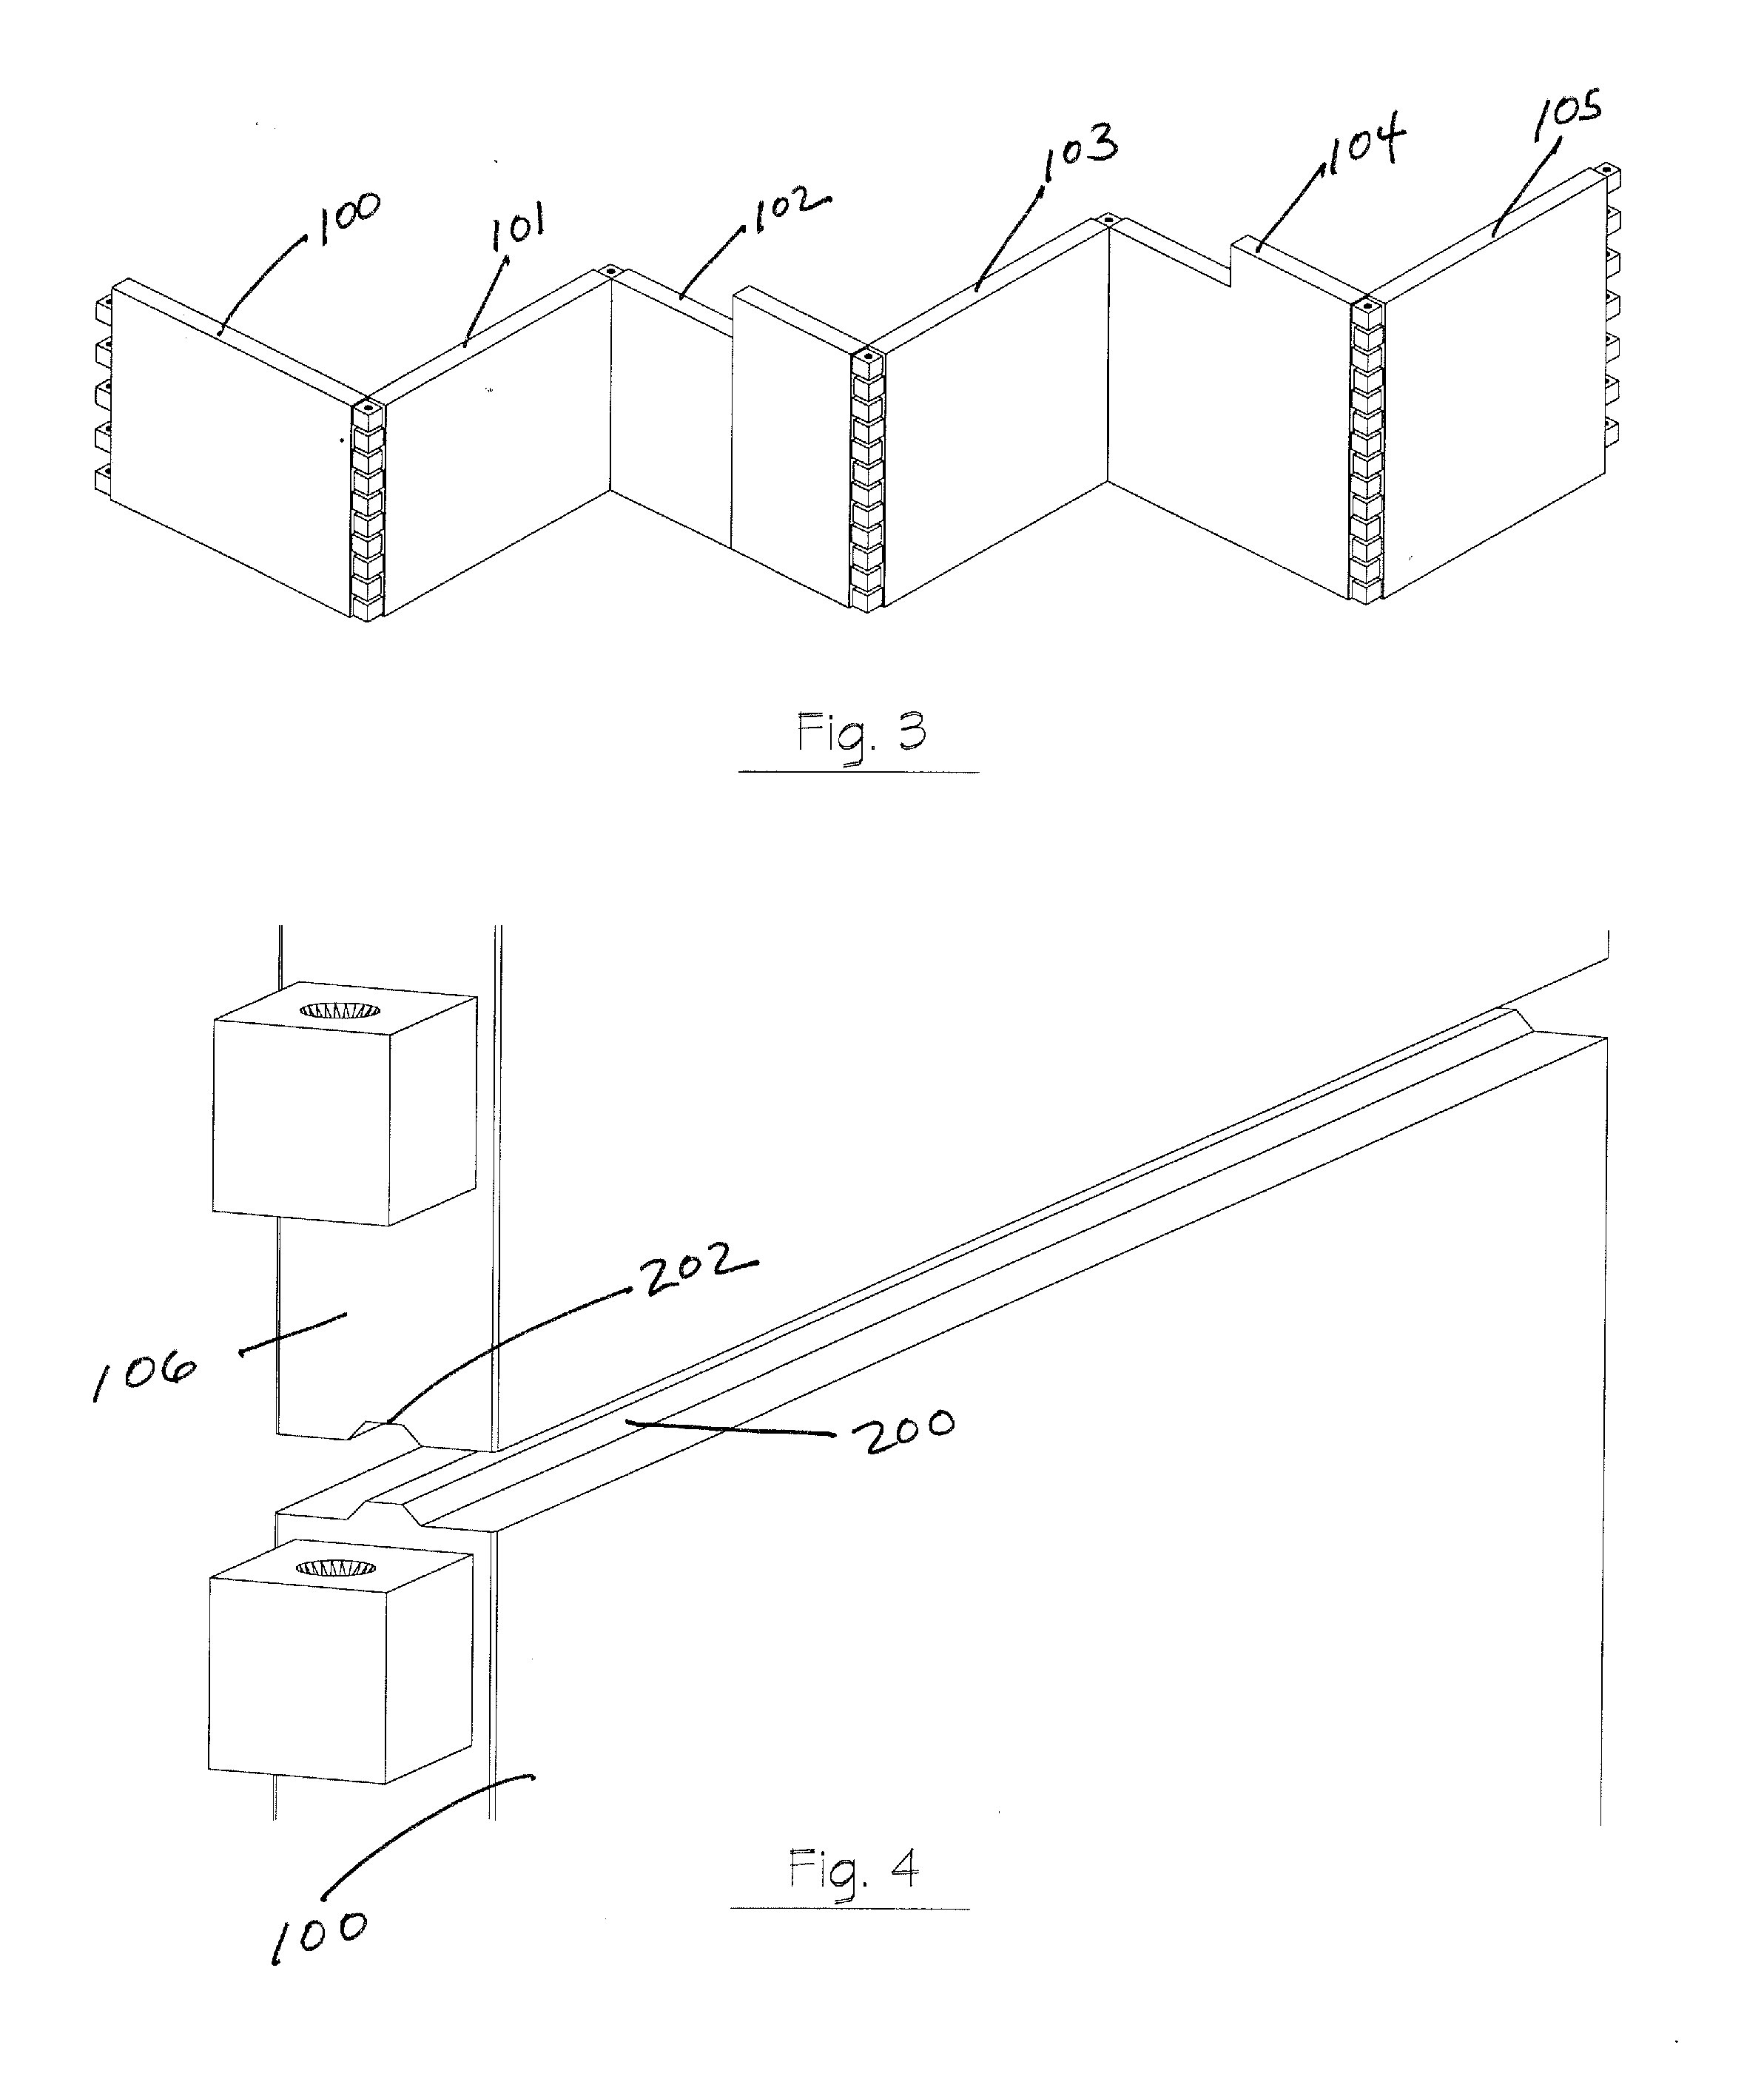 Method and apparatus for precast wall and floor block system